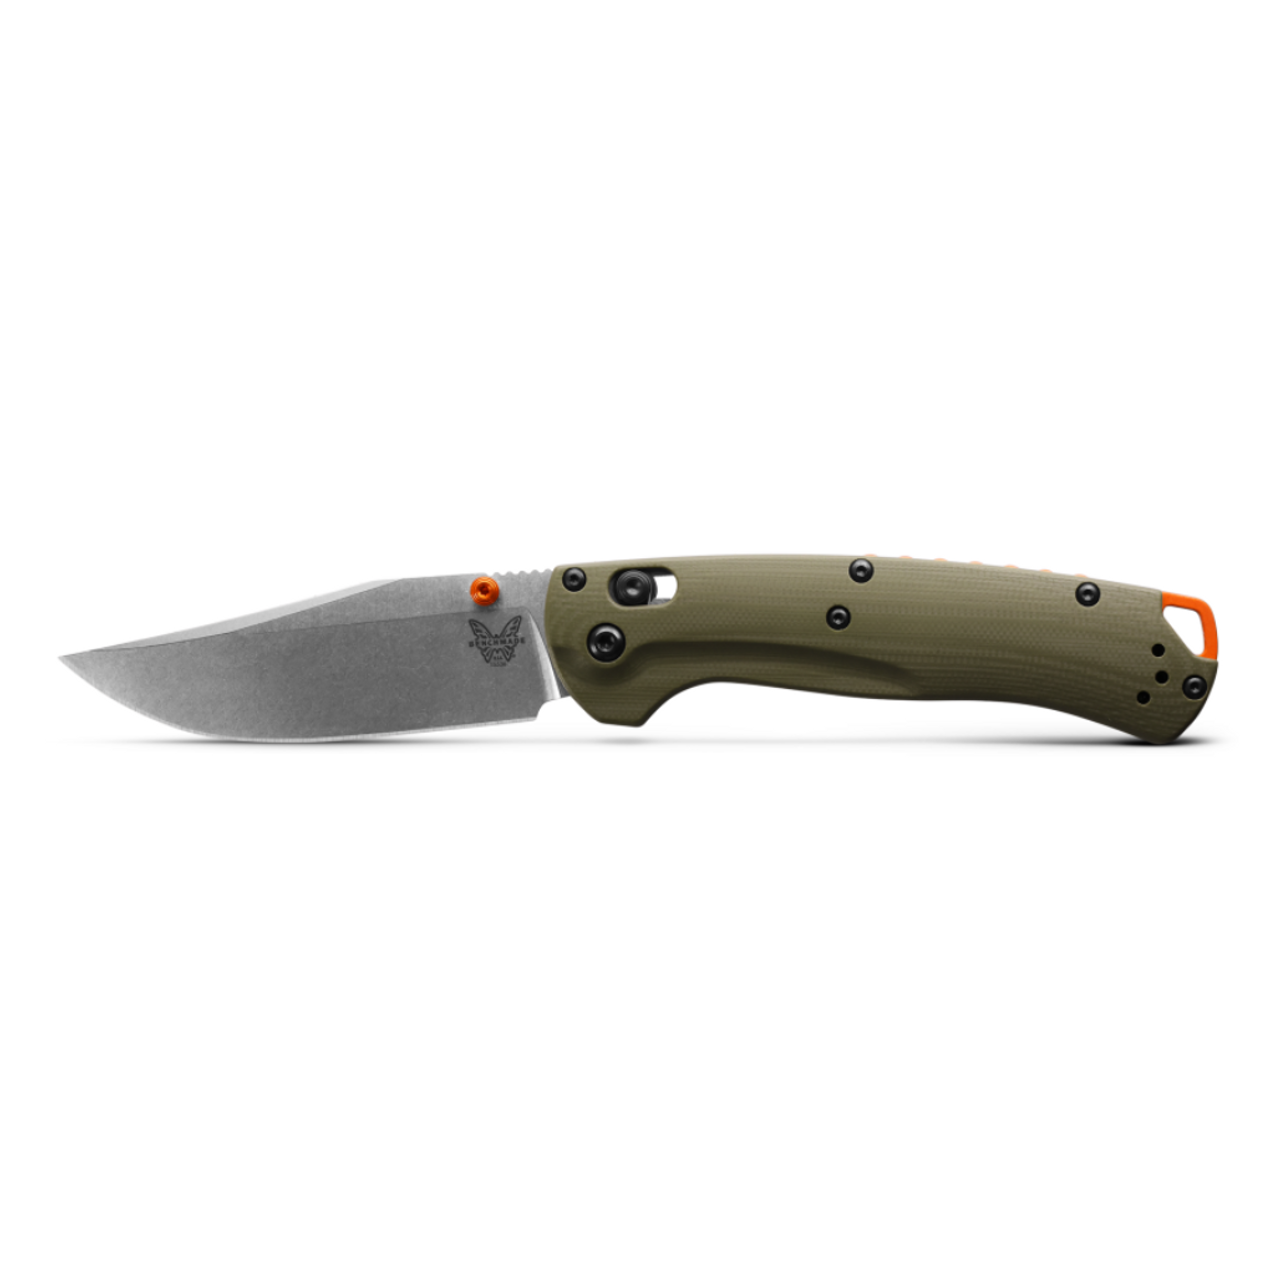 TAGGEDOUT Knife | OD Green